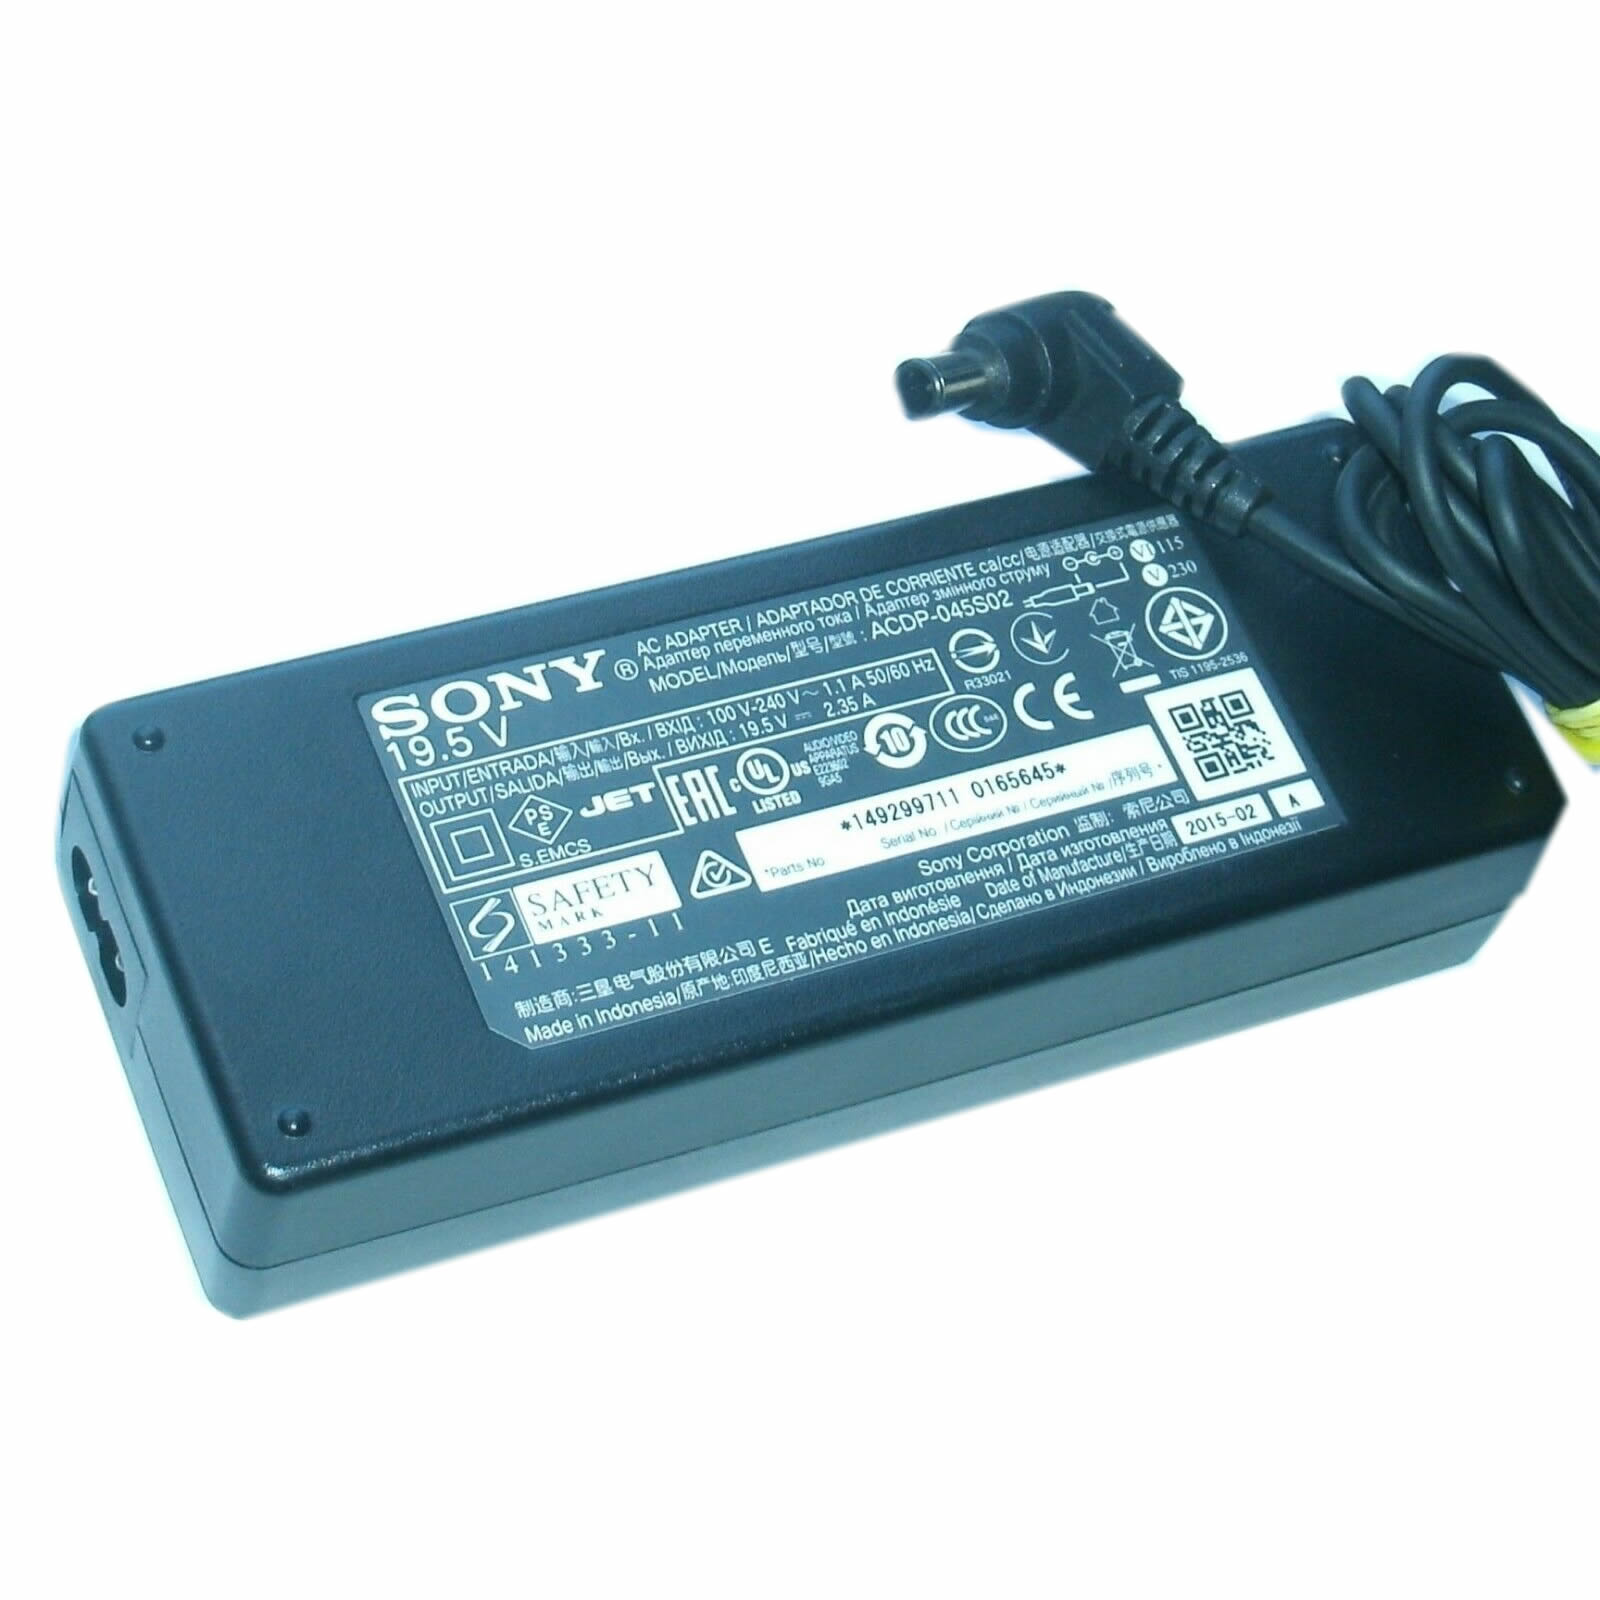 Sony ACDP-045S01,ACDP-045S02,ACDP-045S03 chargeur 19.5V 2.35A 46W alimentation originale pour Sony KDL-32R500C, KLV-24P412C séries